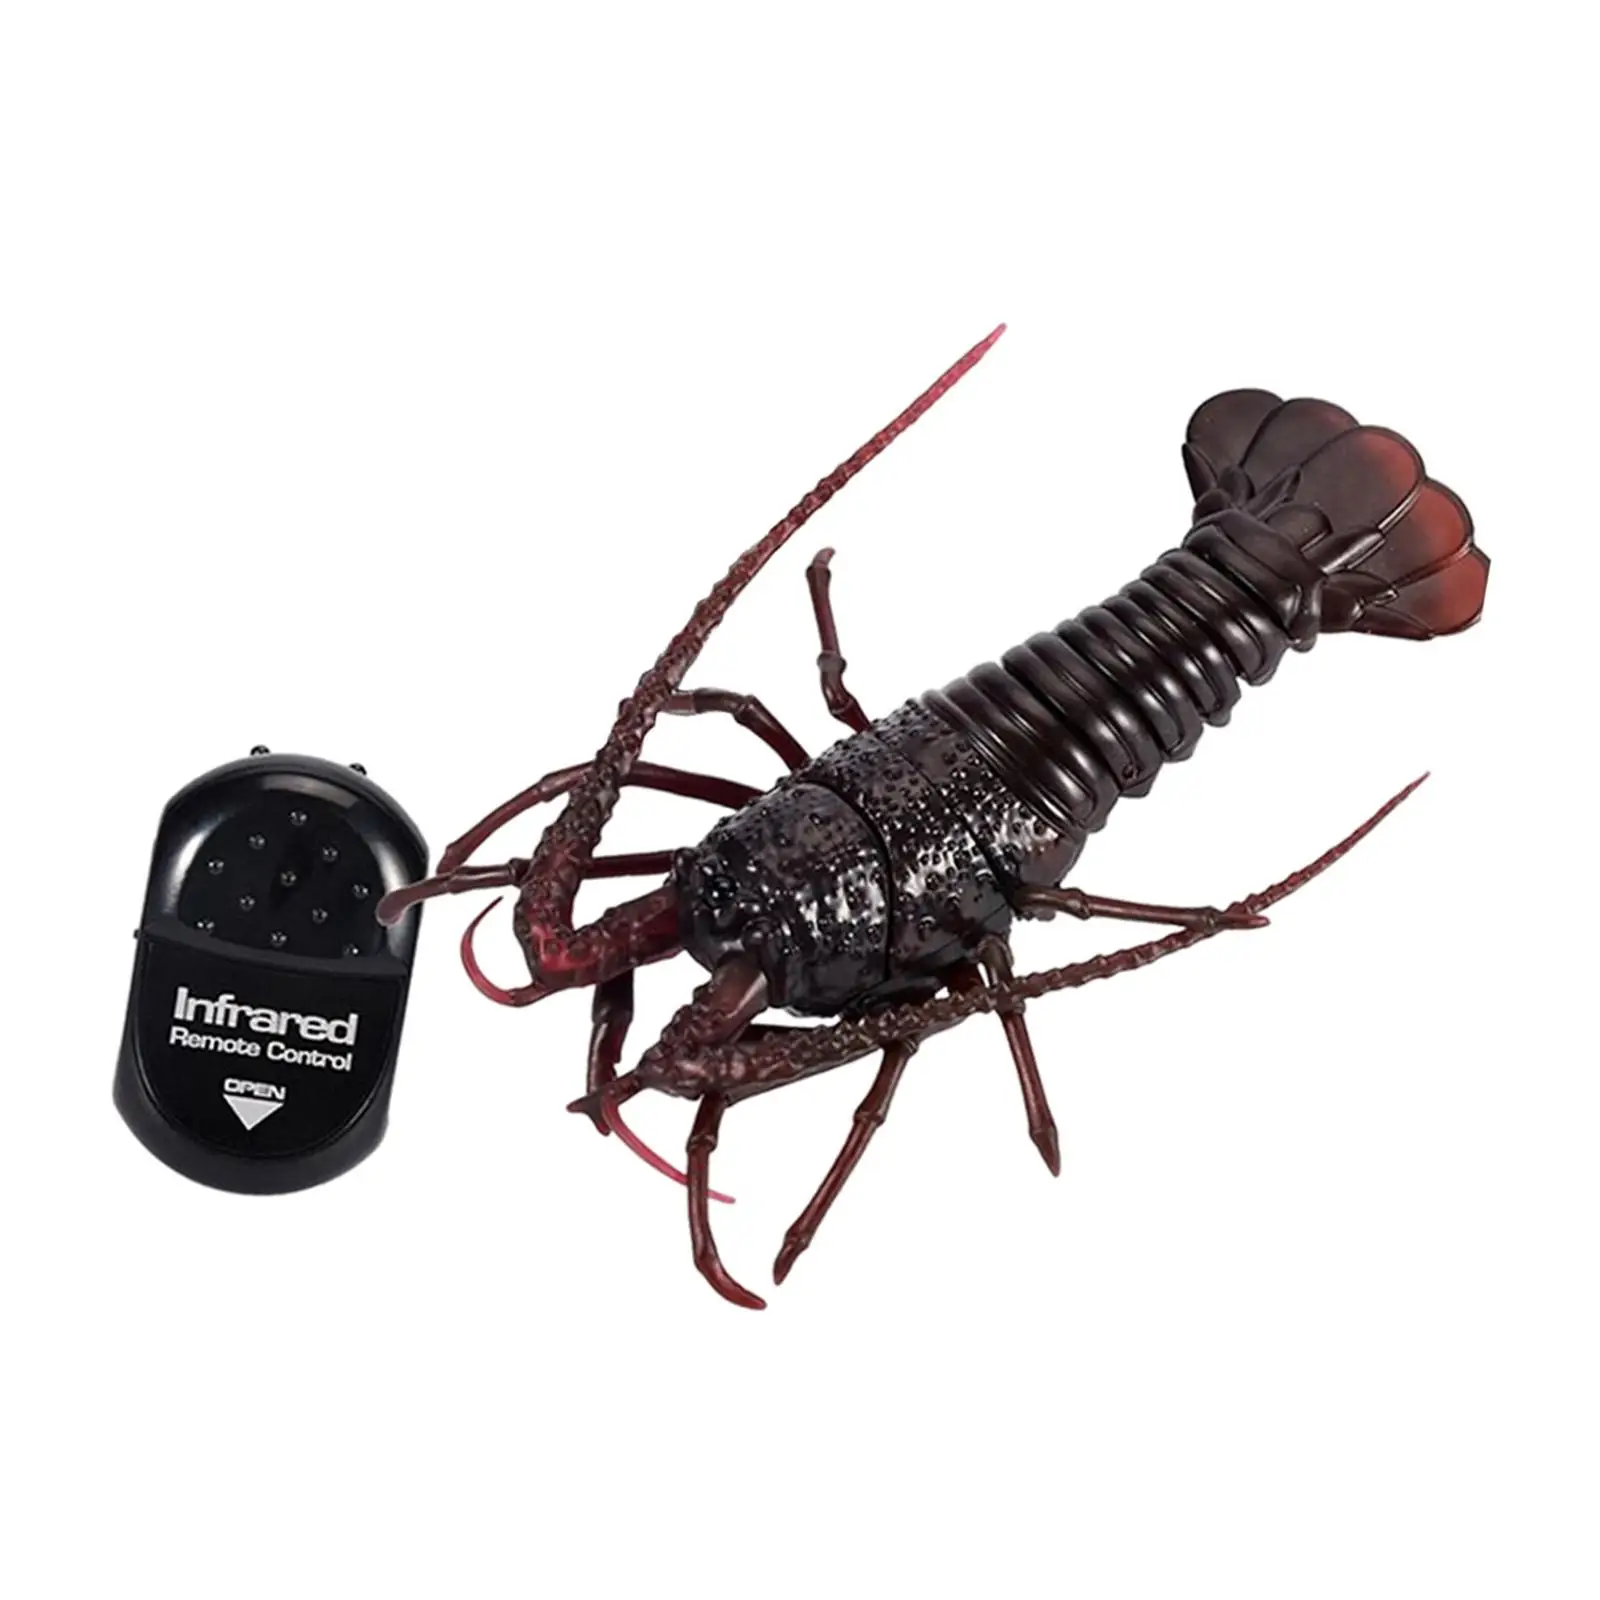 Remote Control Crawfish Toy Realistic Remote Control Vehicle Car Animal Joke Toys Electric Infrared RC Shrimp for Children Gifts